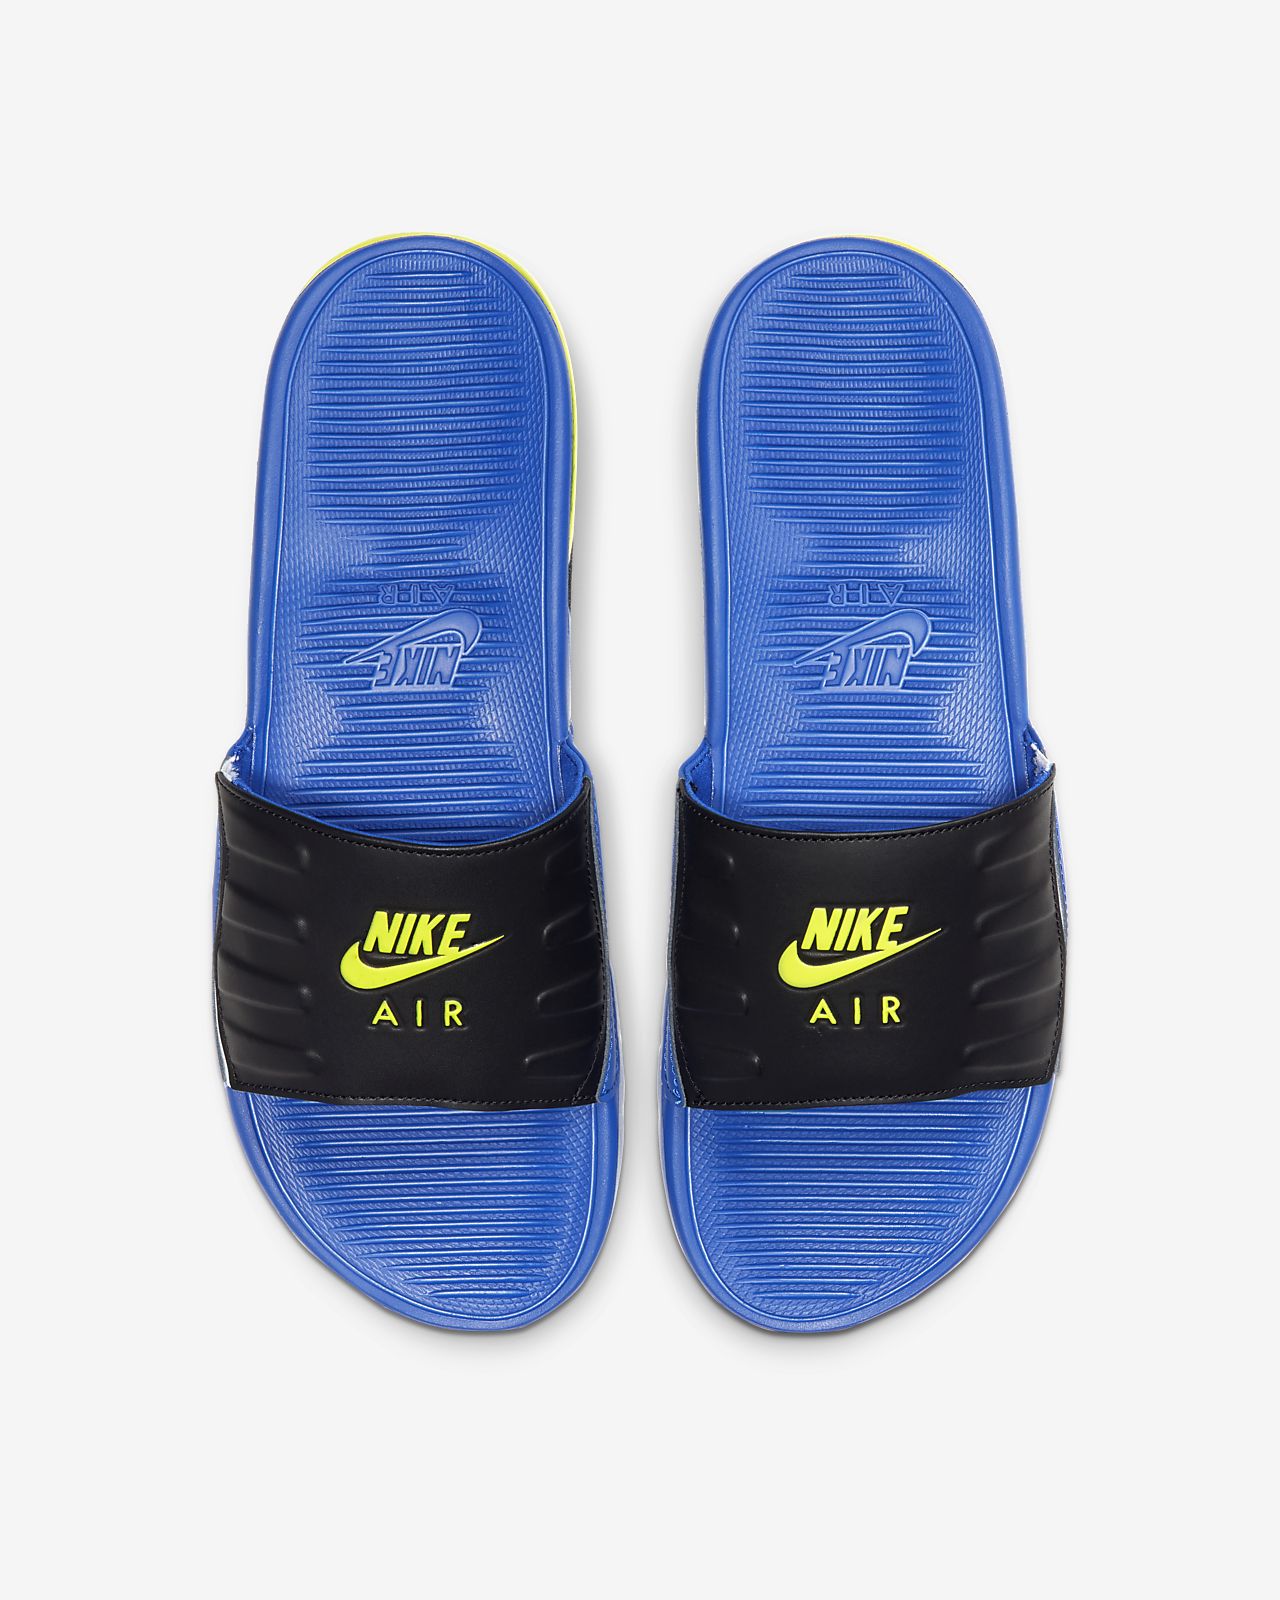 royal blue nike slides with gold check 